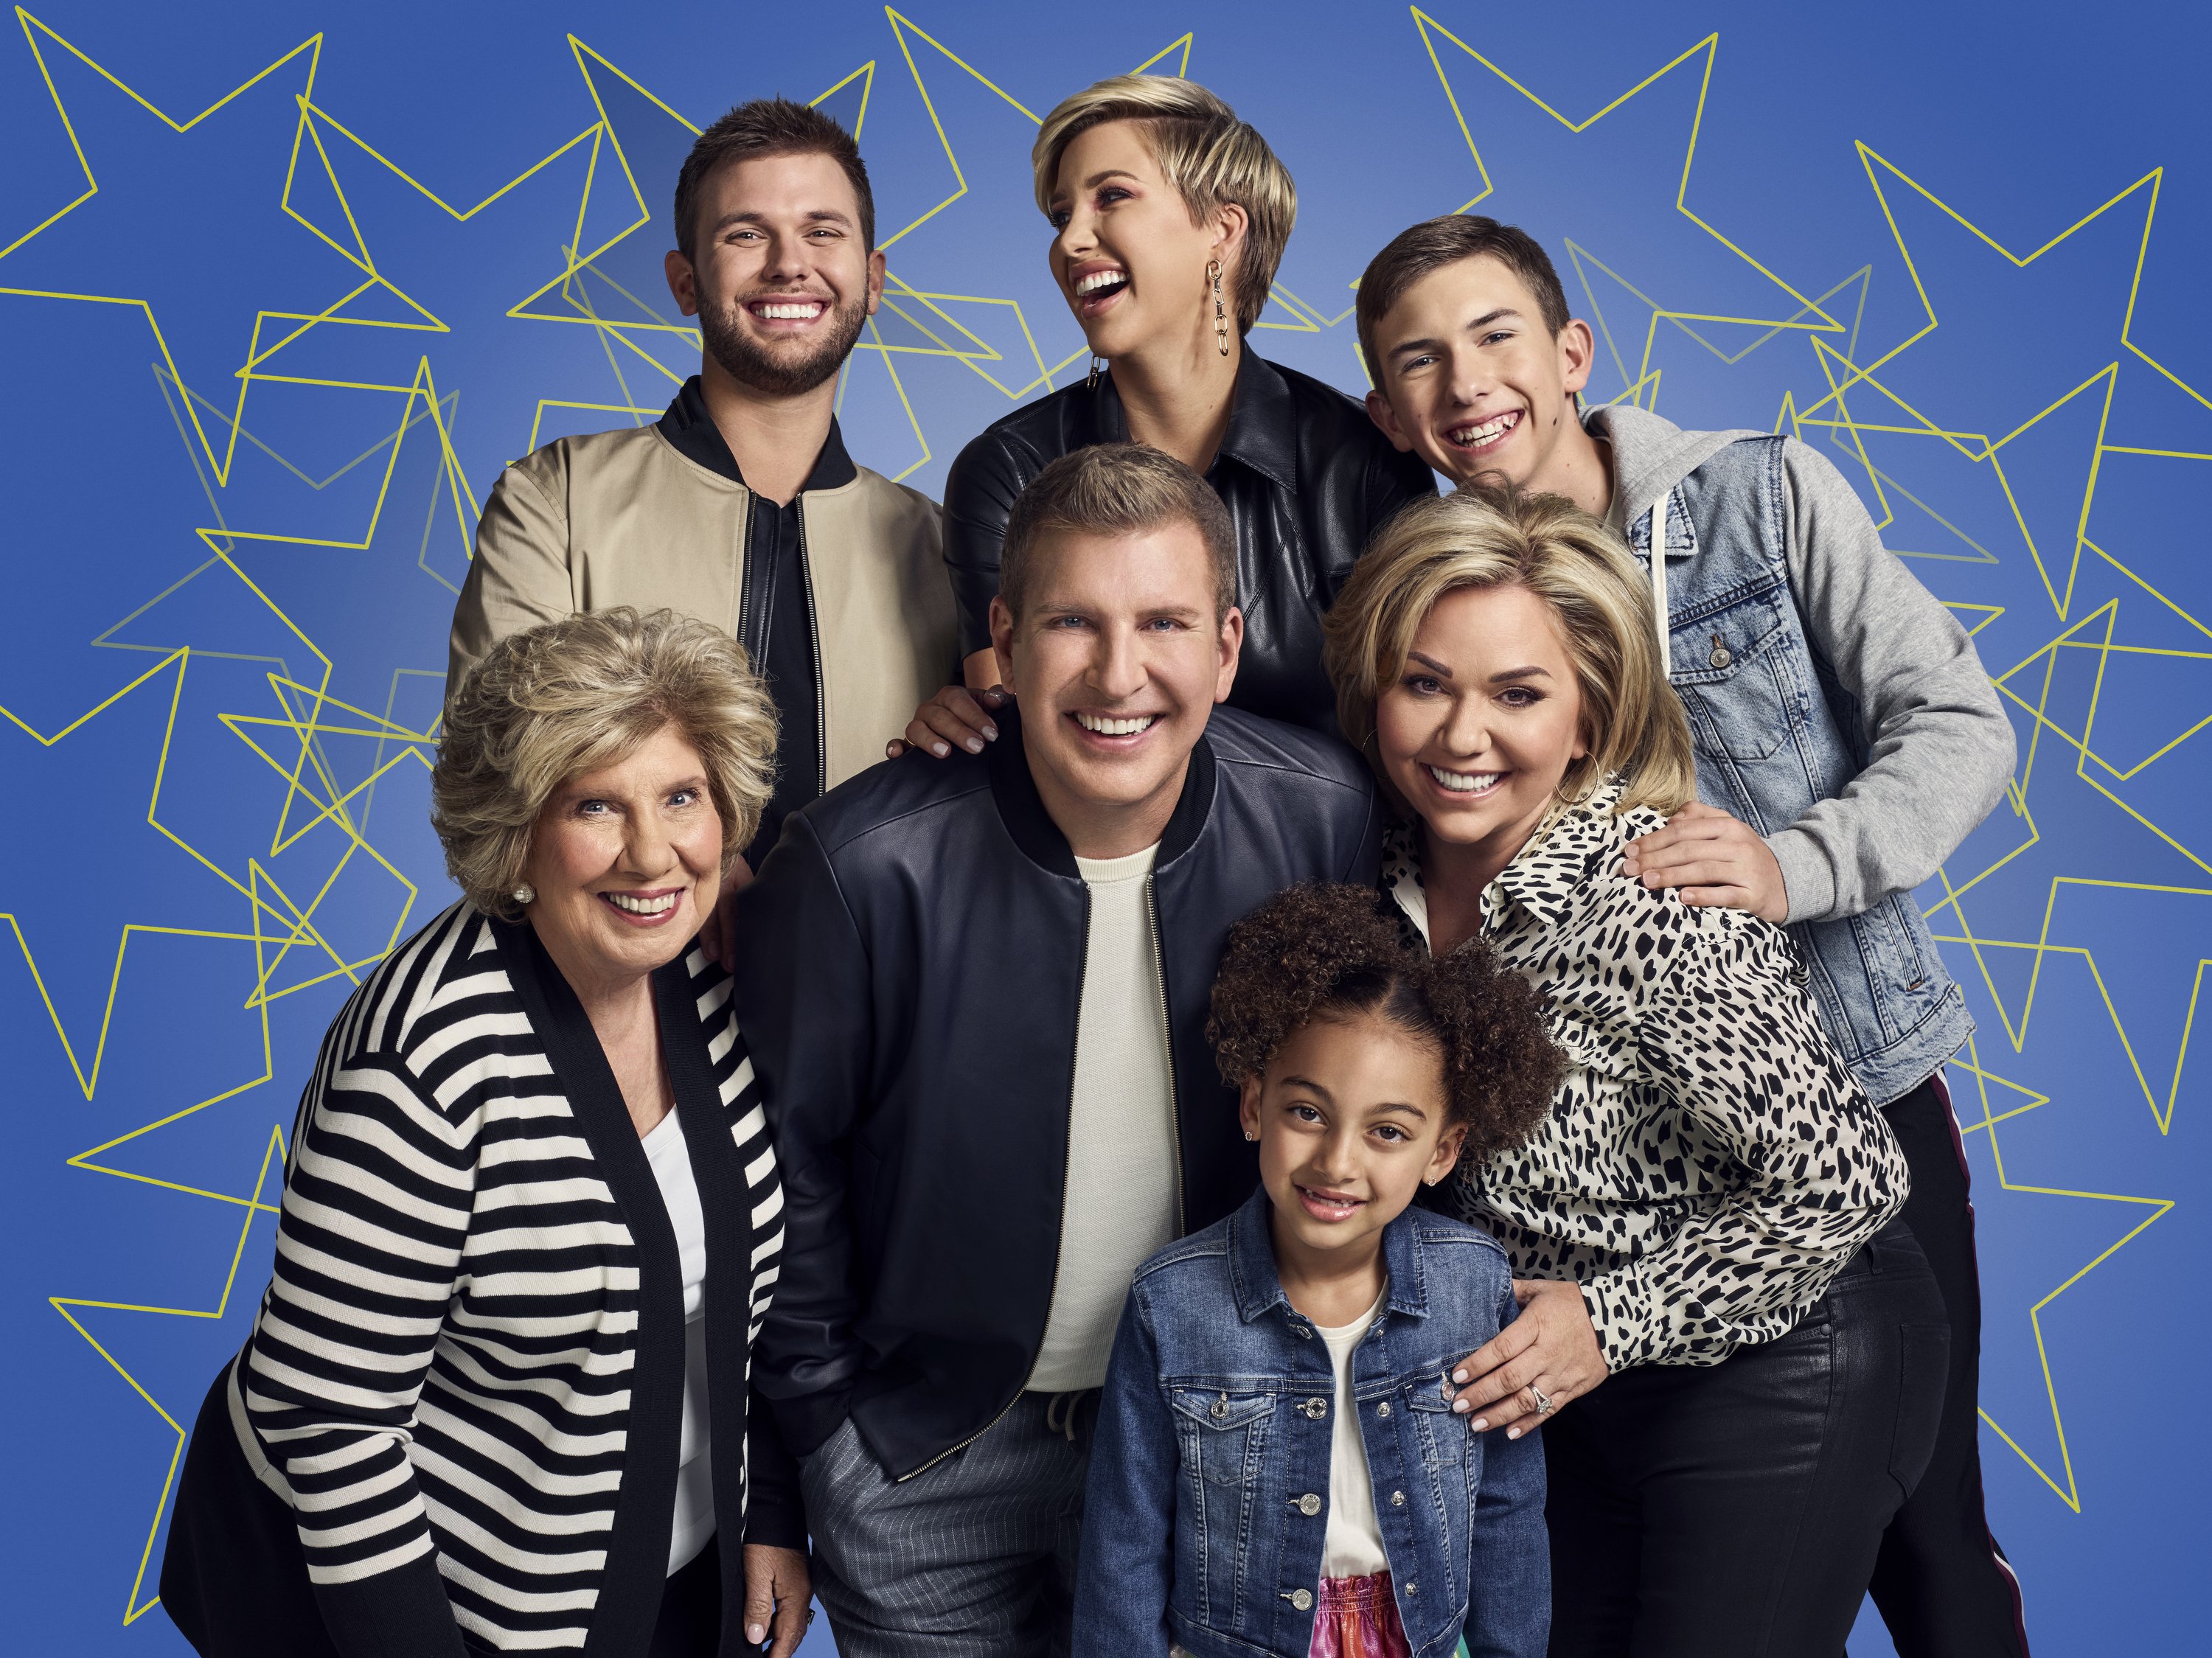 Faye Chrisley, Chase Chrisley, Todd Chrisley, Savannah Chrisley, Chloe Chrisley, Julie Chrisley,  and Grayson Chrisley pictured on March 9, 2020. | Source: Getty Images.